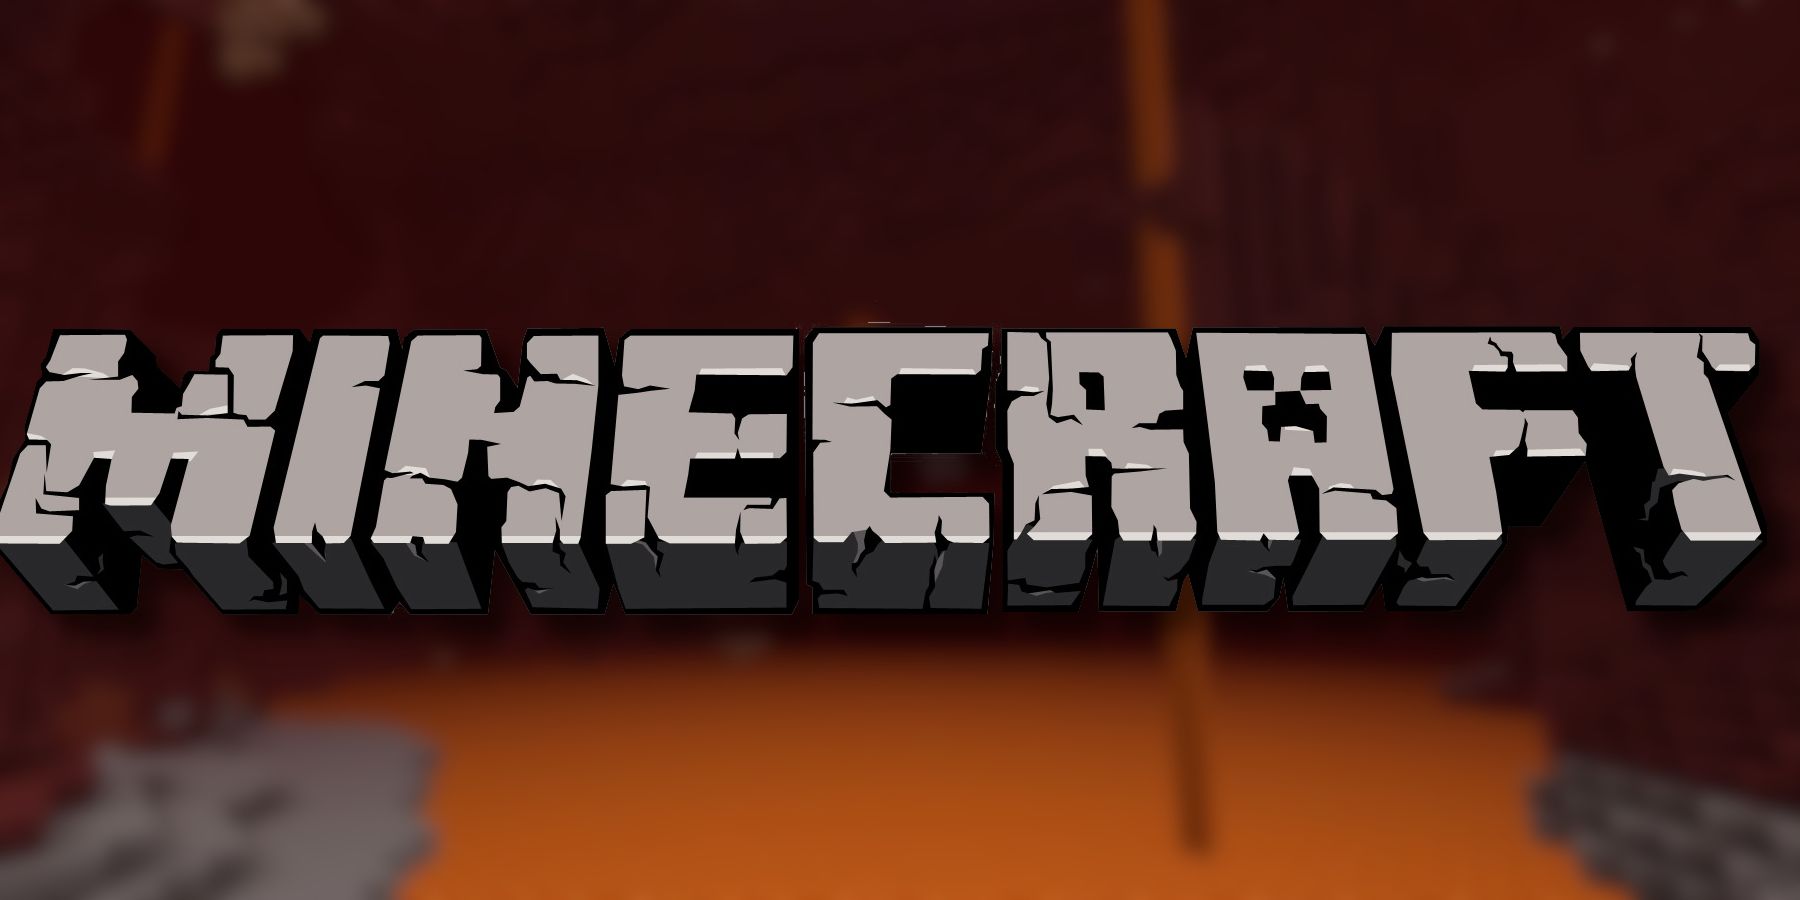 The Minecraft logo in the center with a blurry image of the Nether in the background.